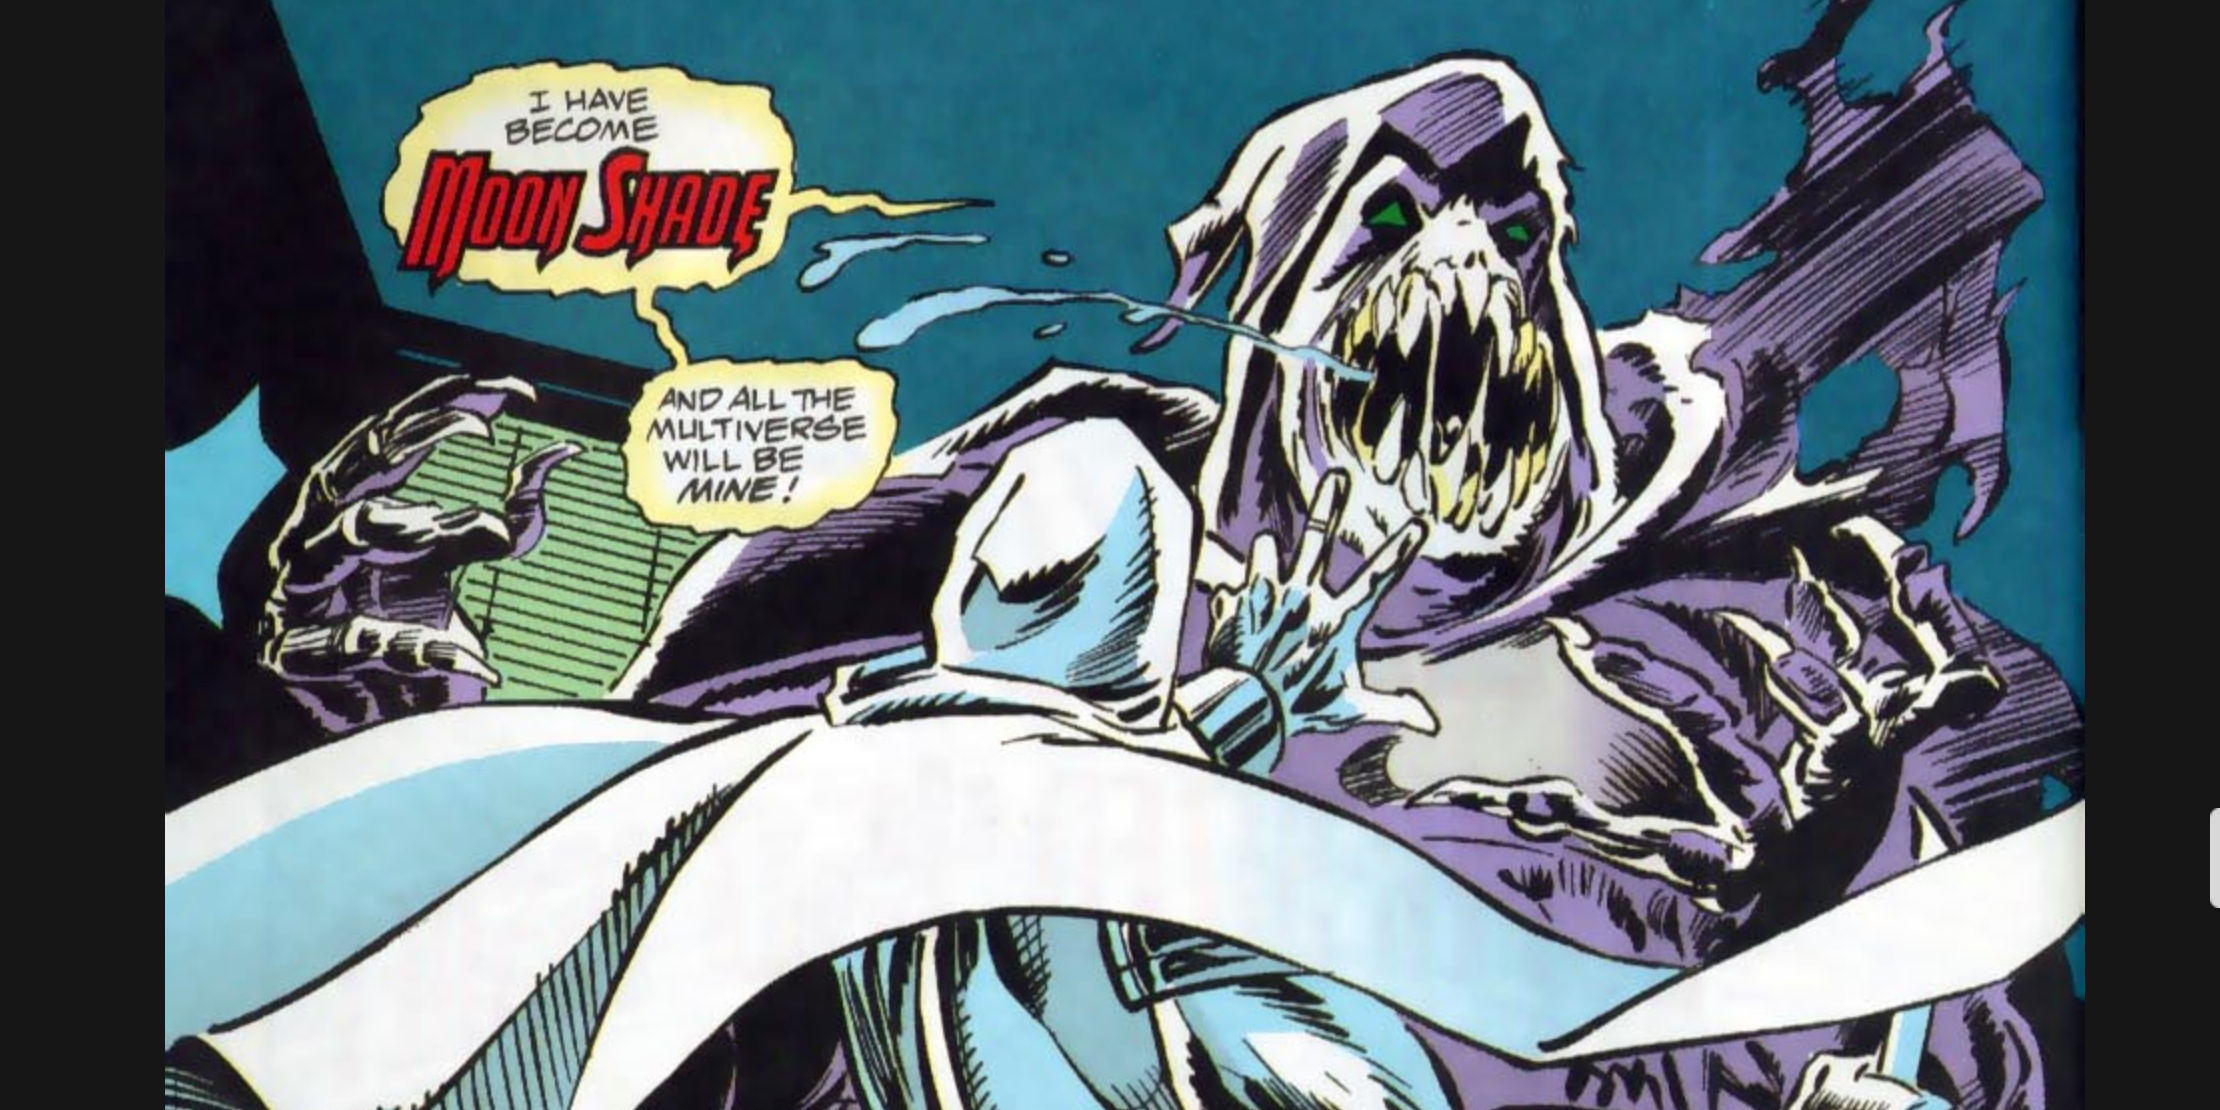 Moon Knight faces down Moon Shade in Marvel Comics